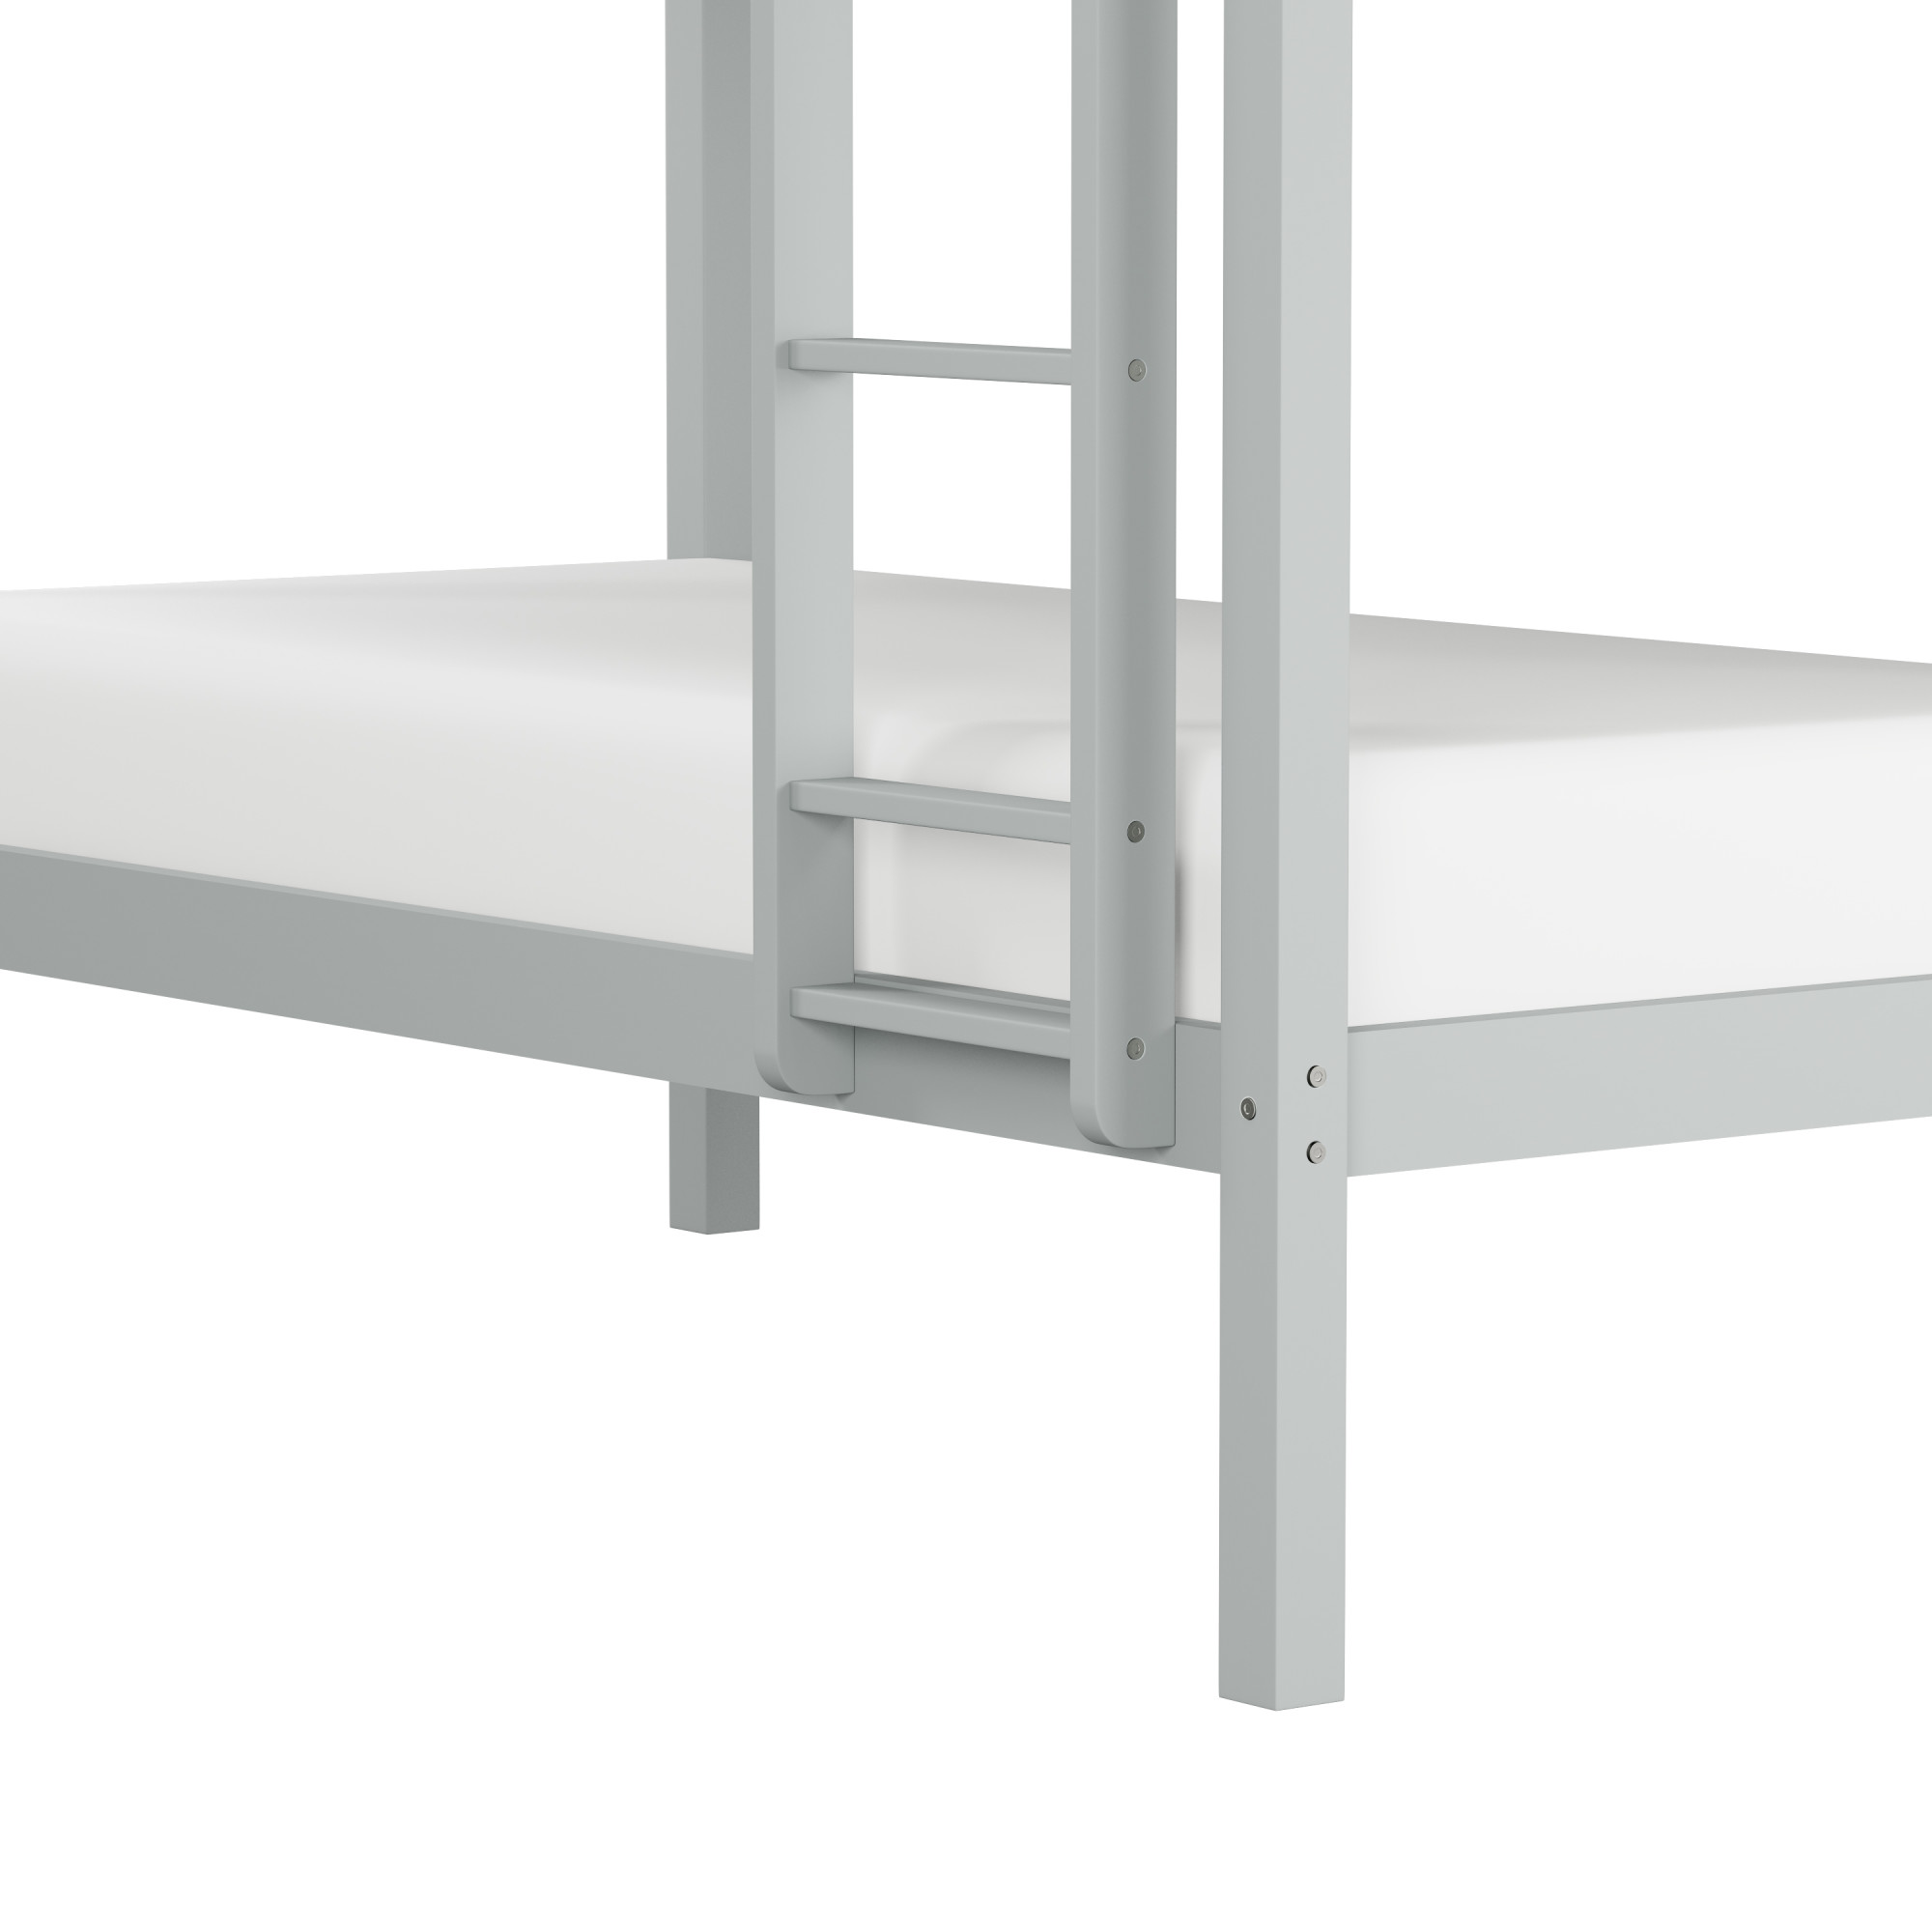 Hillsdale Caspian Twin Over Twin Bunk Bed with Hanging Night Tray, Multiple Colors - image 5 of 5